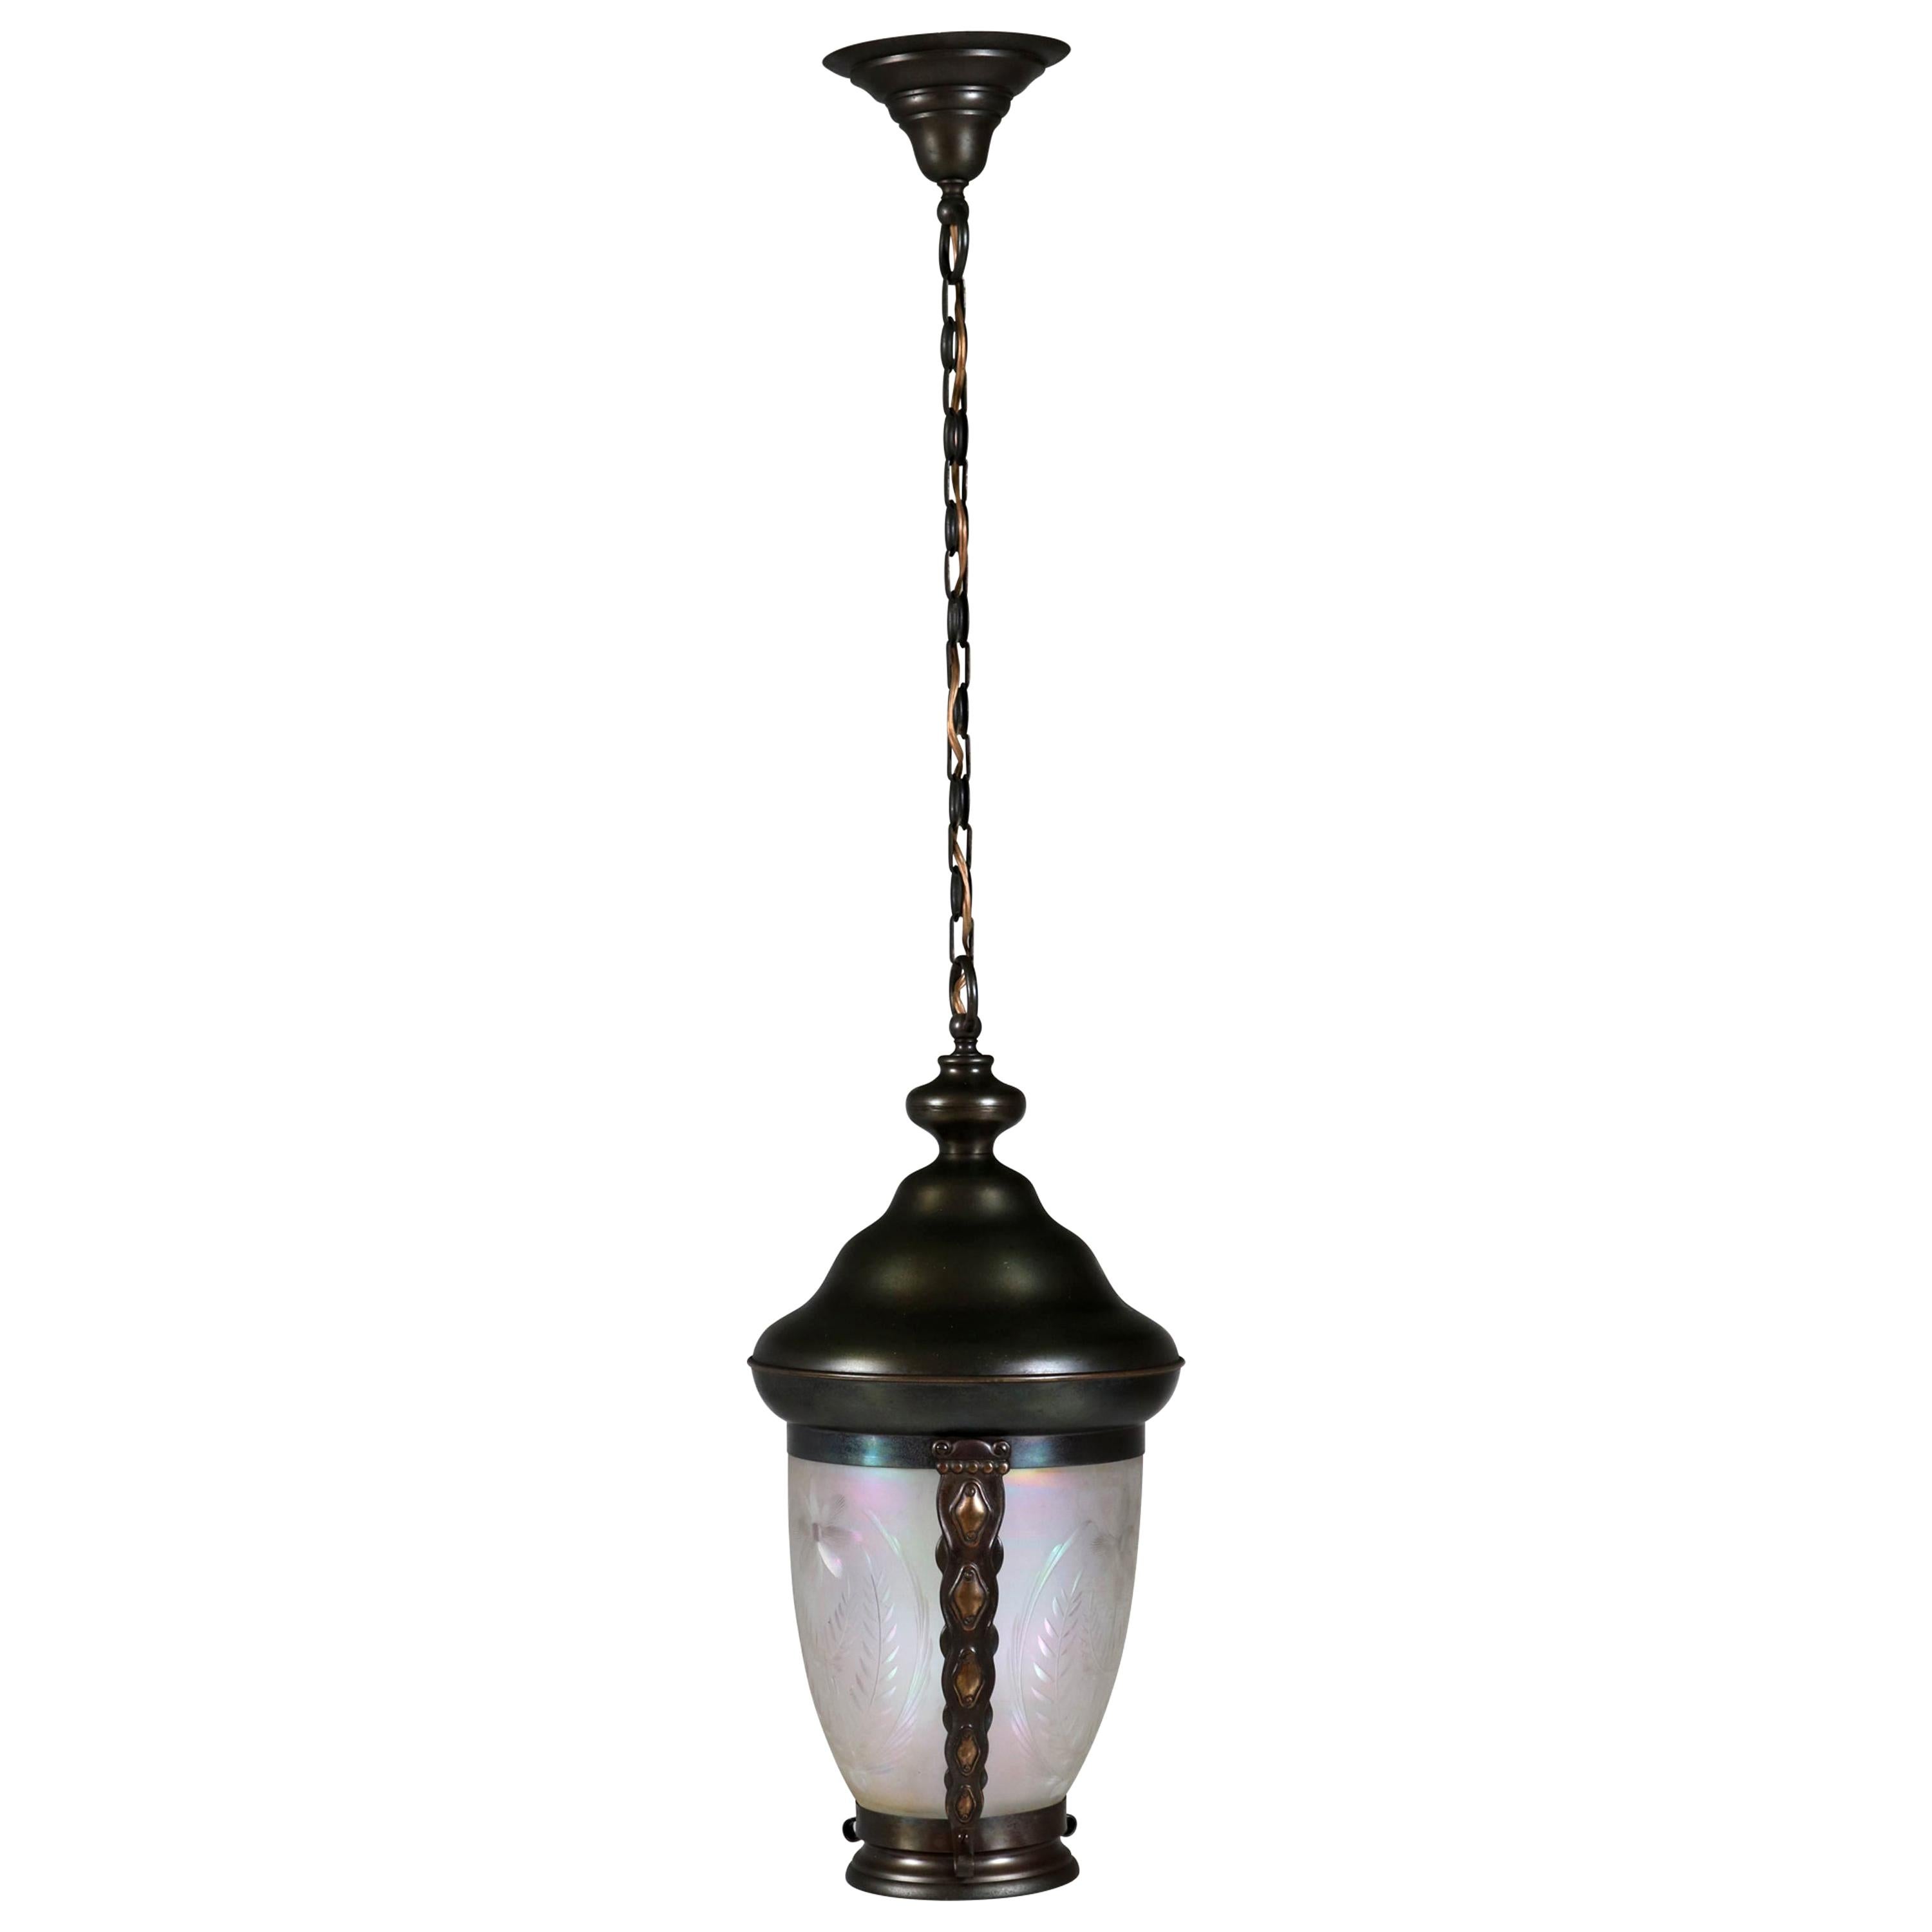 Brass Art Nouveau Lantern or Pendant Lamp with Petrol Glass Shade, 1900s